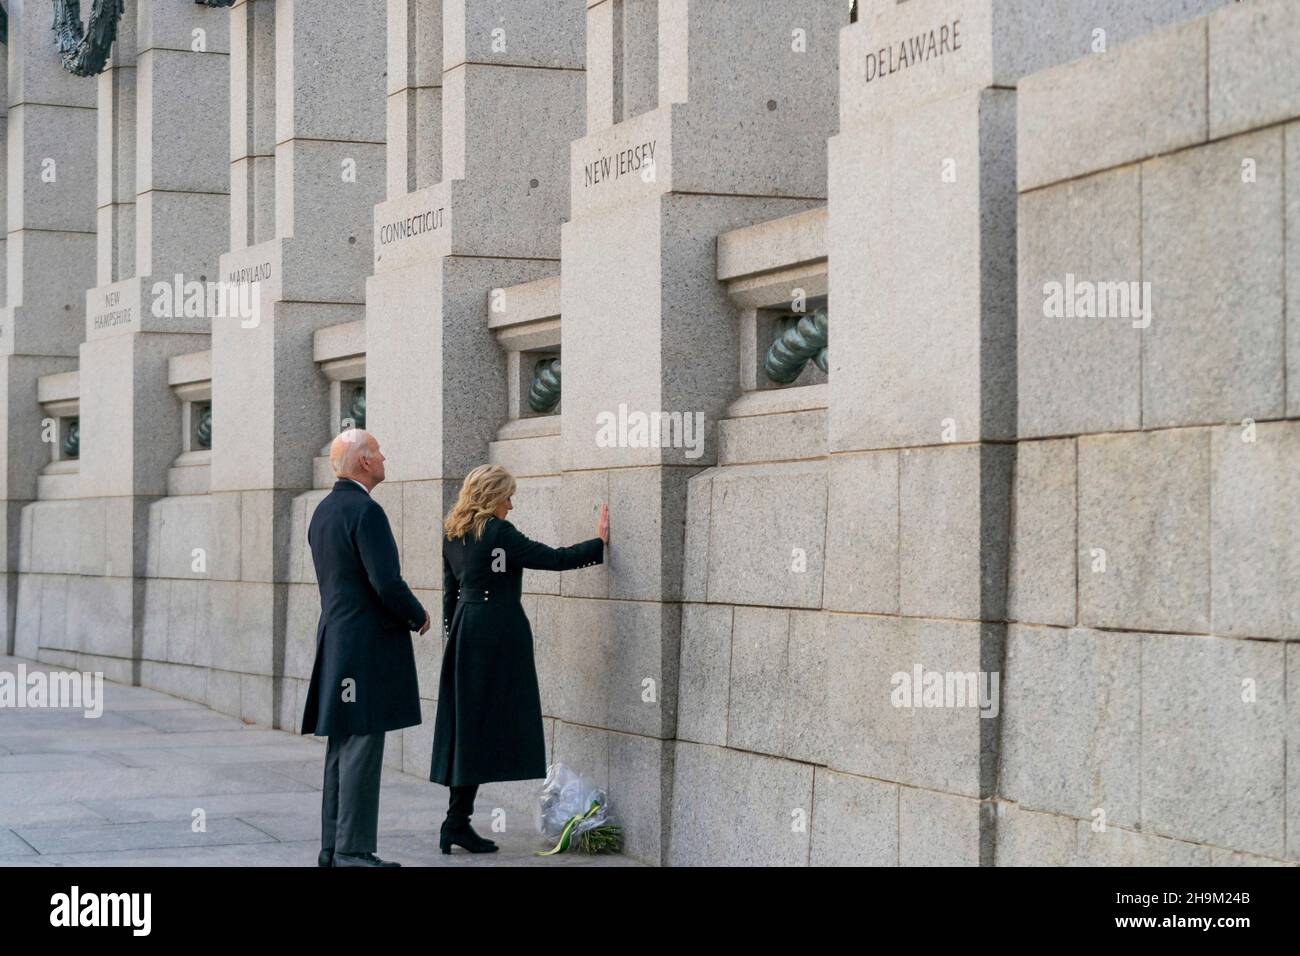 Washington, United States Of America. 07th Dec, 2021. Washington, United States of America. 07 December, 2021. U.S President Joe Biden and First Lady Jill Biden pause to mark the 80th anniversary of the Japanese attack on Pearl Harbor at the World War Two memorial, December 7, 2021 in Washington, DC Credit: Adam Schultz/White House Photo/Alamy Live News Stock Photo